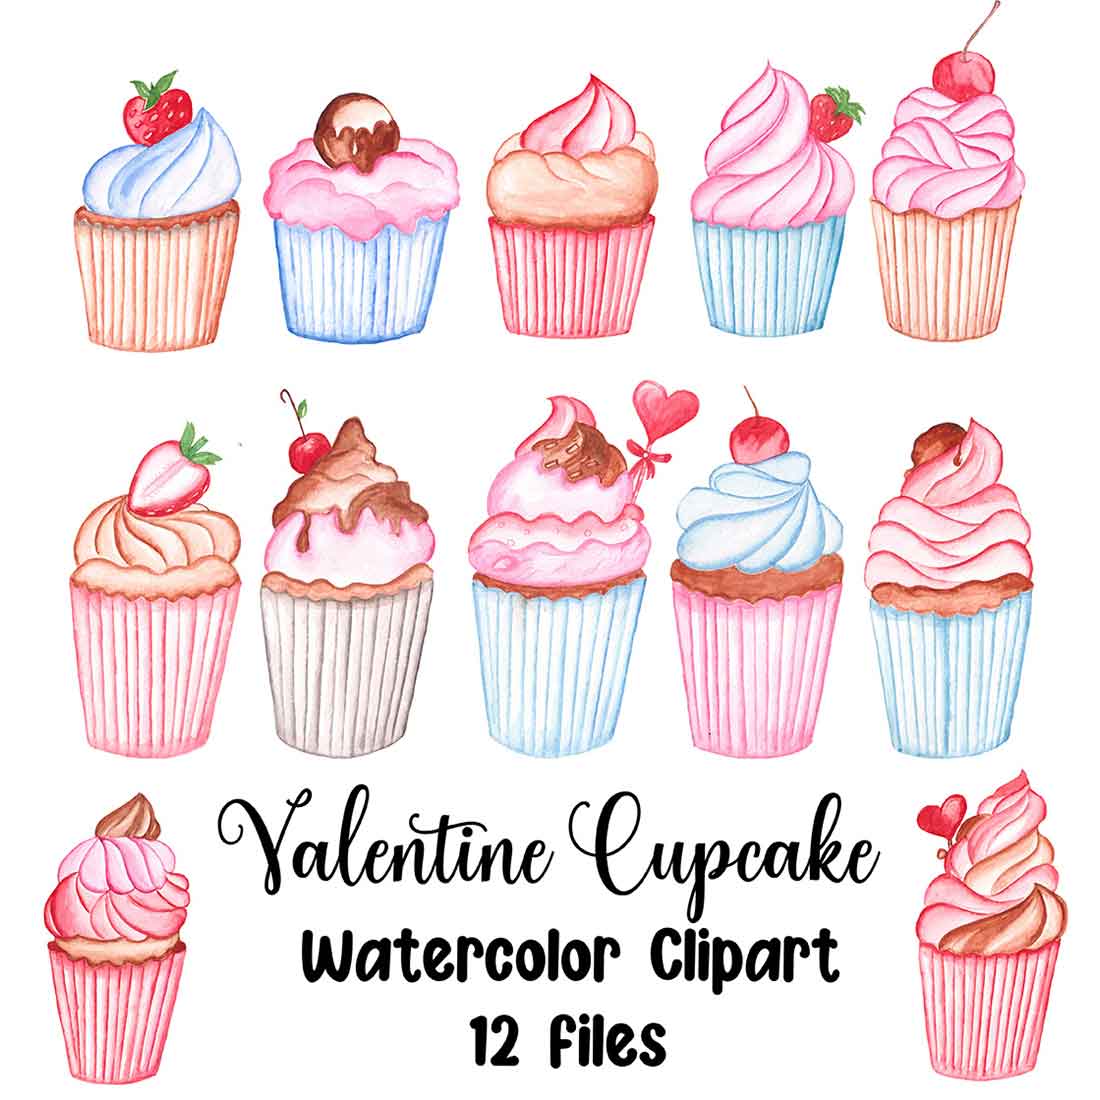 Set of adorable cupcake images